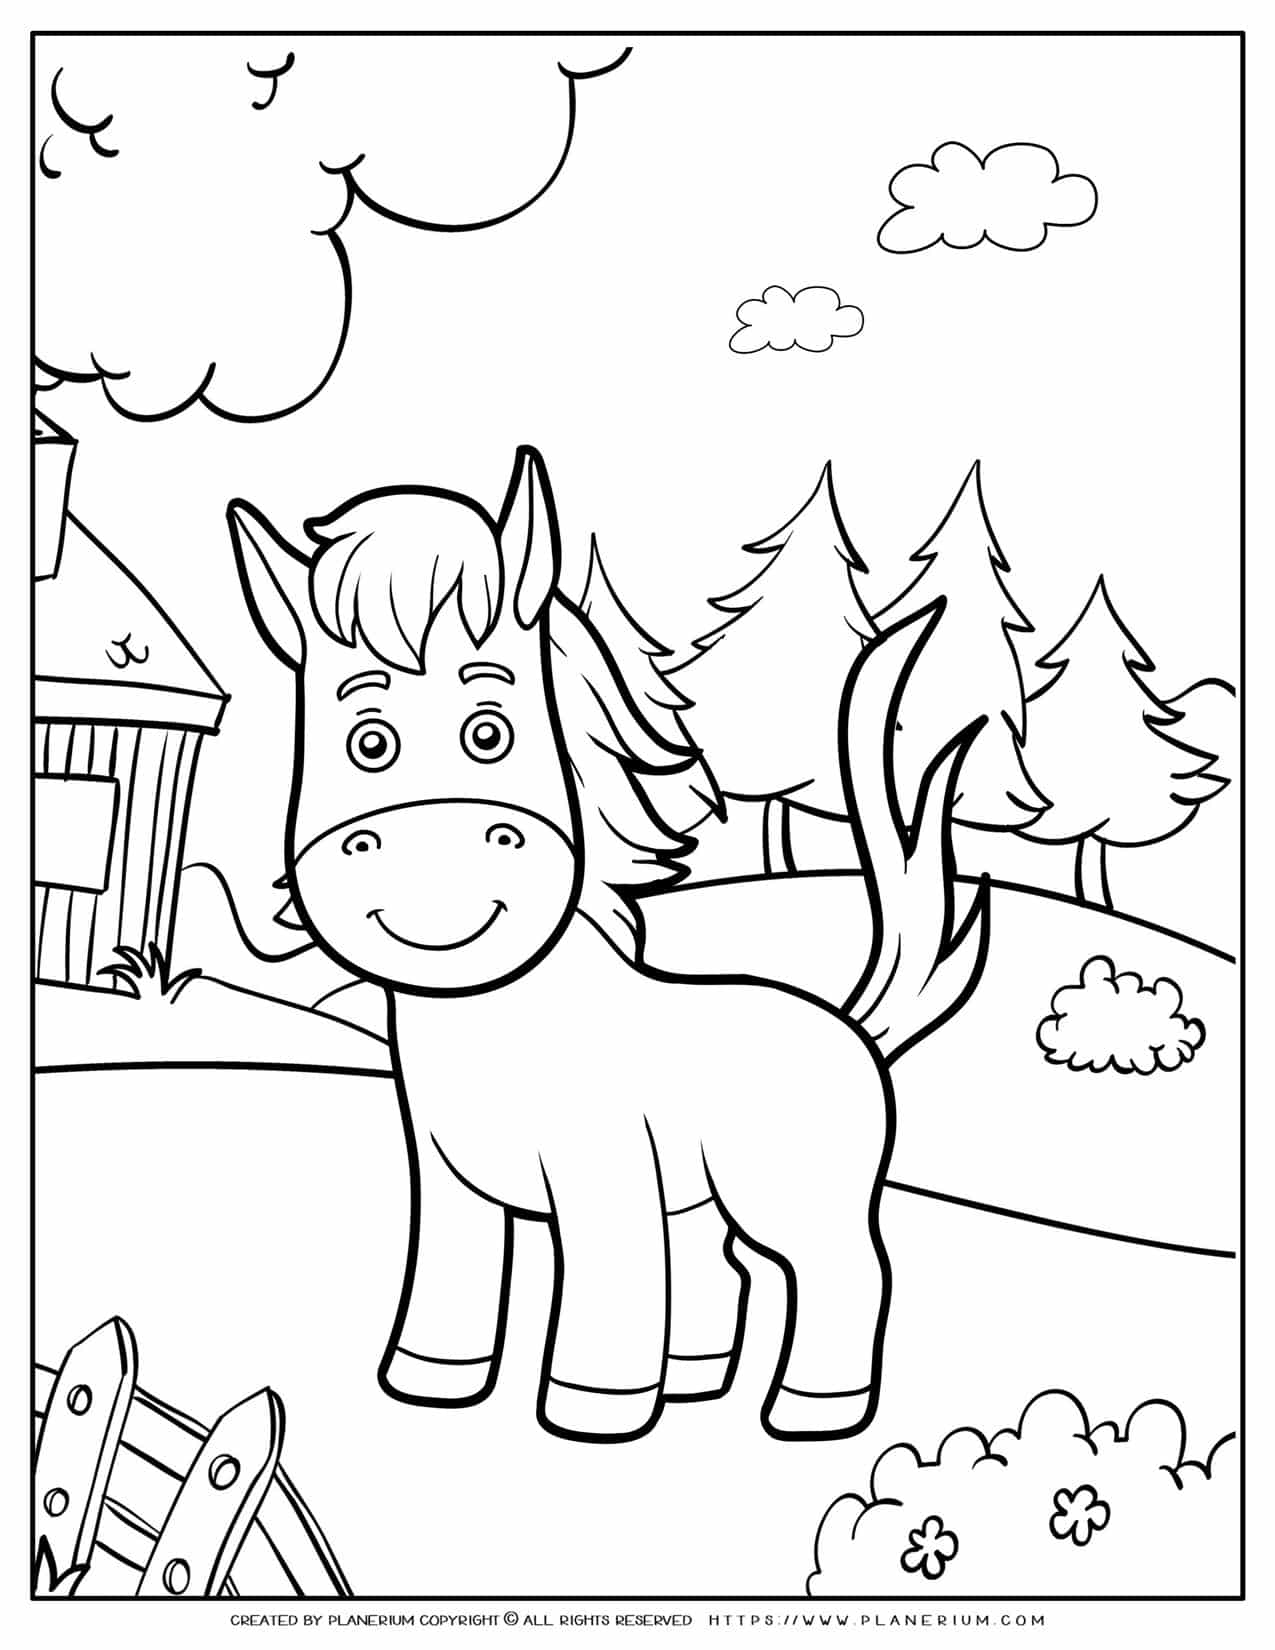 Animals Coloring Page - Horse In a Farm | Planerium